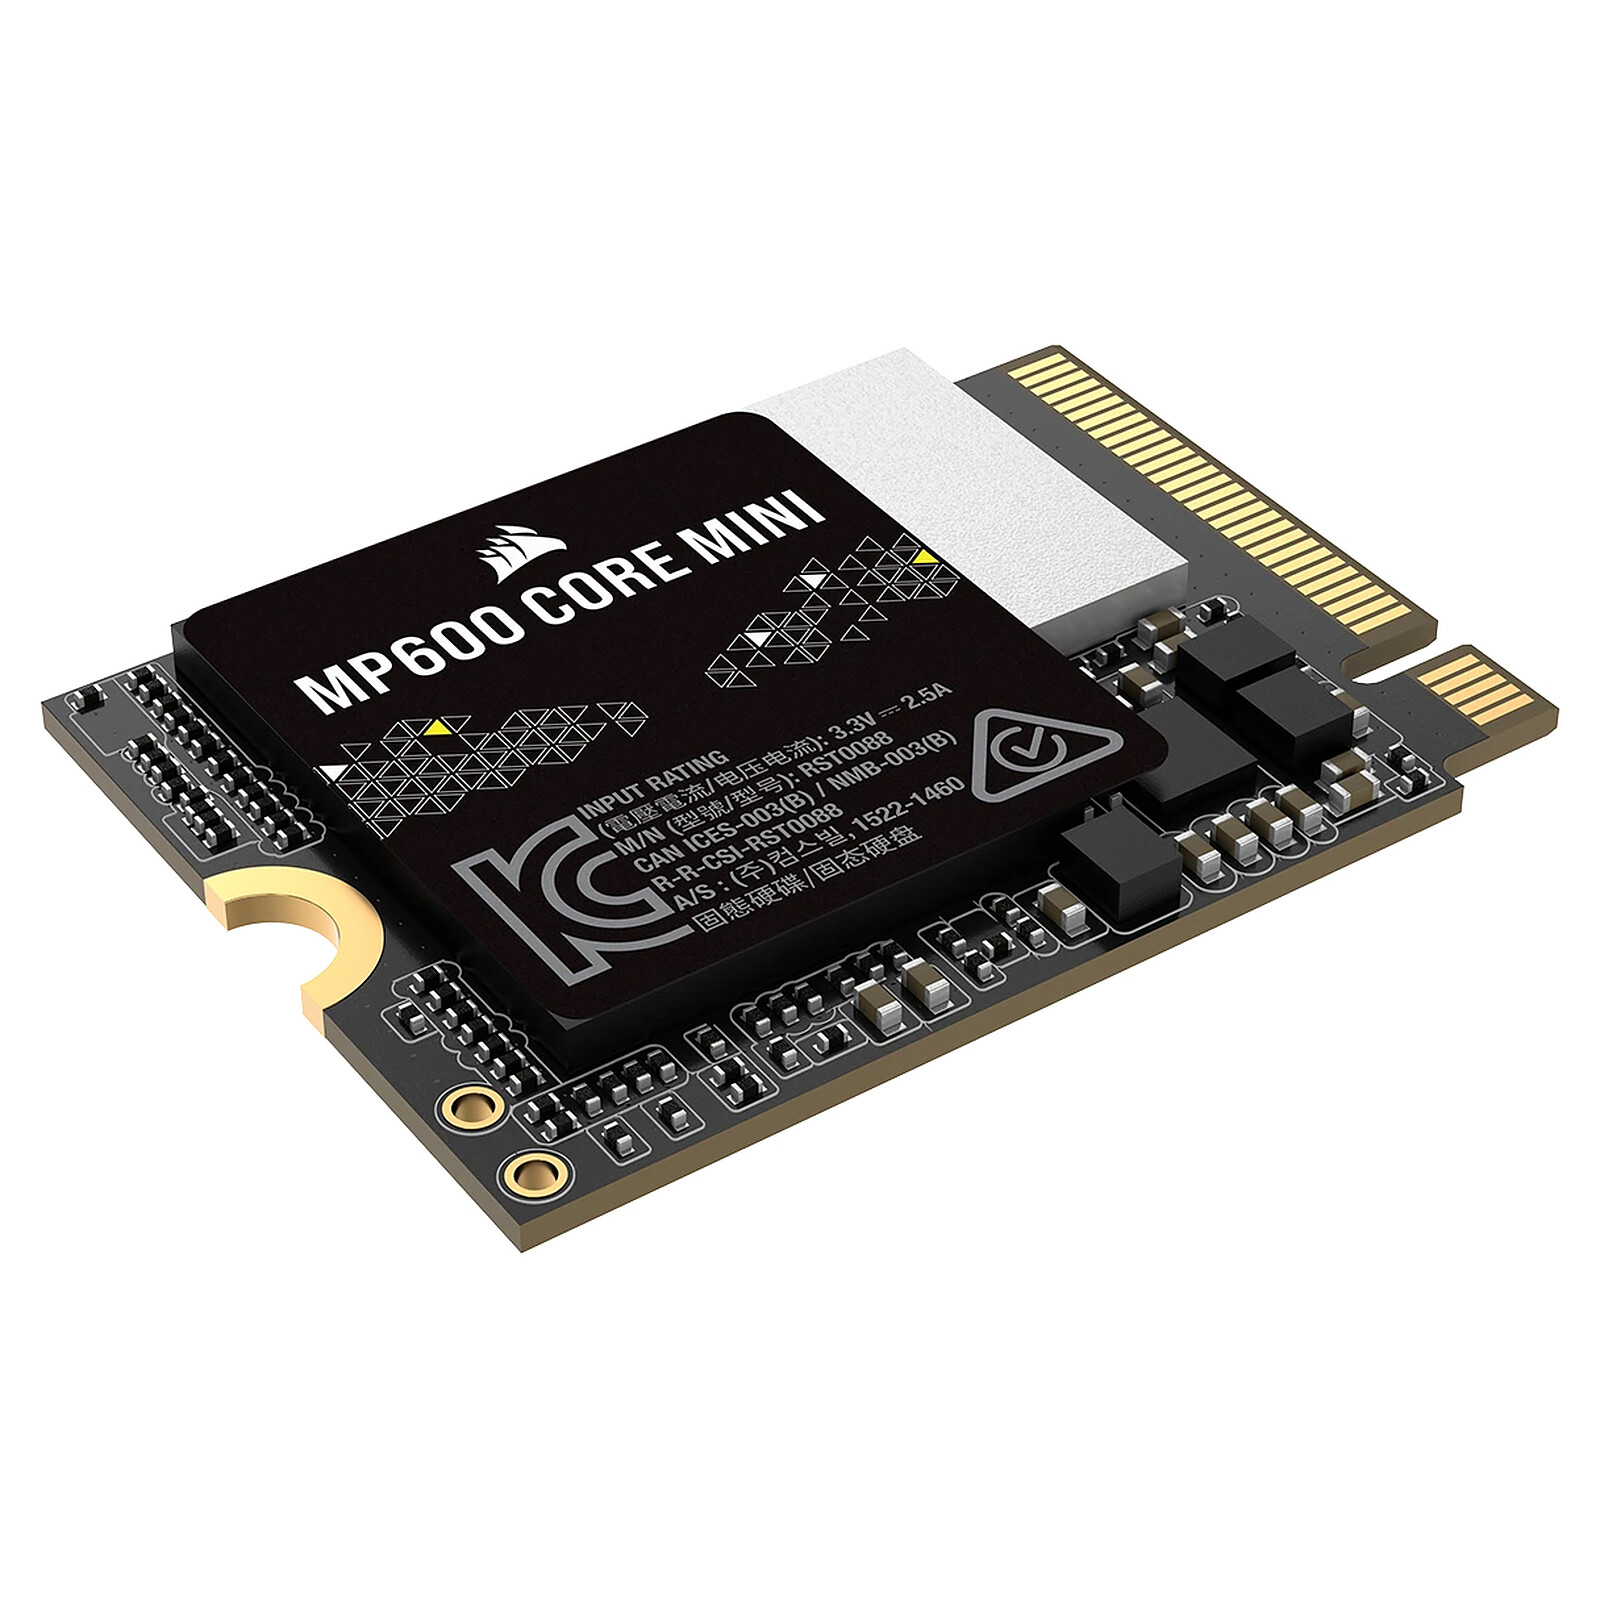 Samsung SSD 870 QVO 4 To - Disque SSD - LDLC